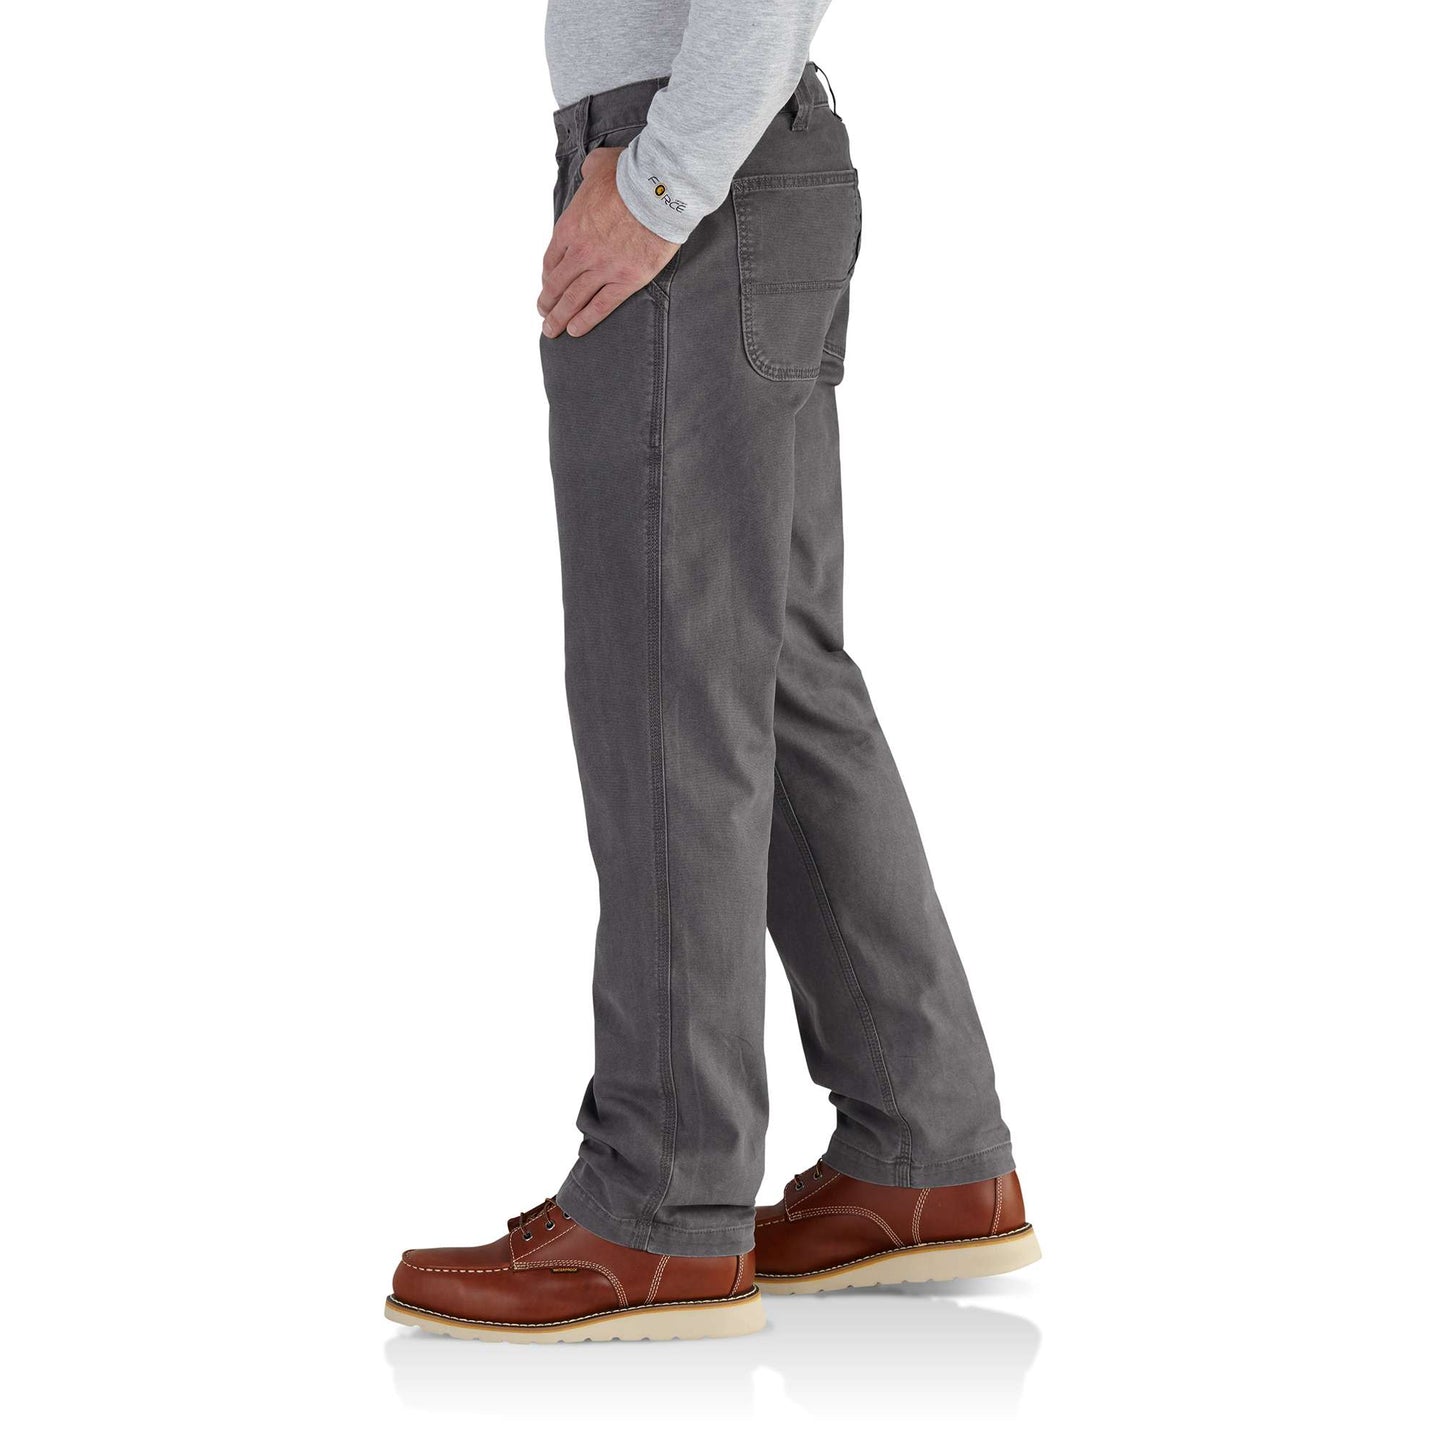 Rugged Flex® Relaxed Fit Canvas Work Pant